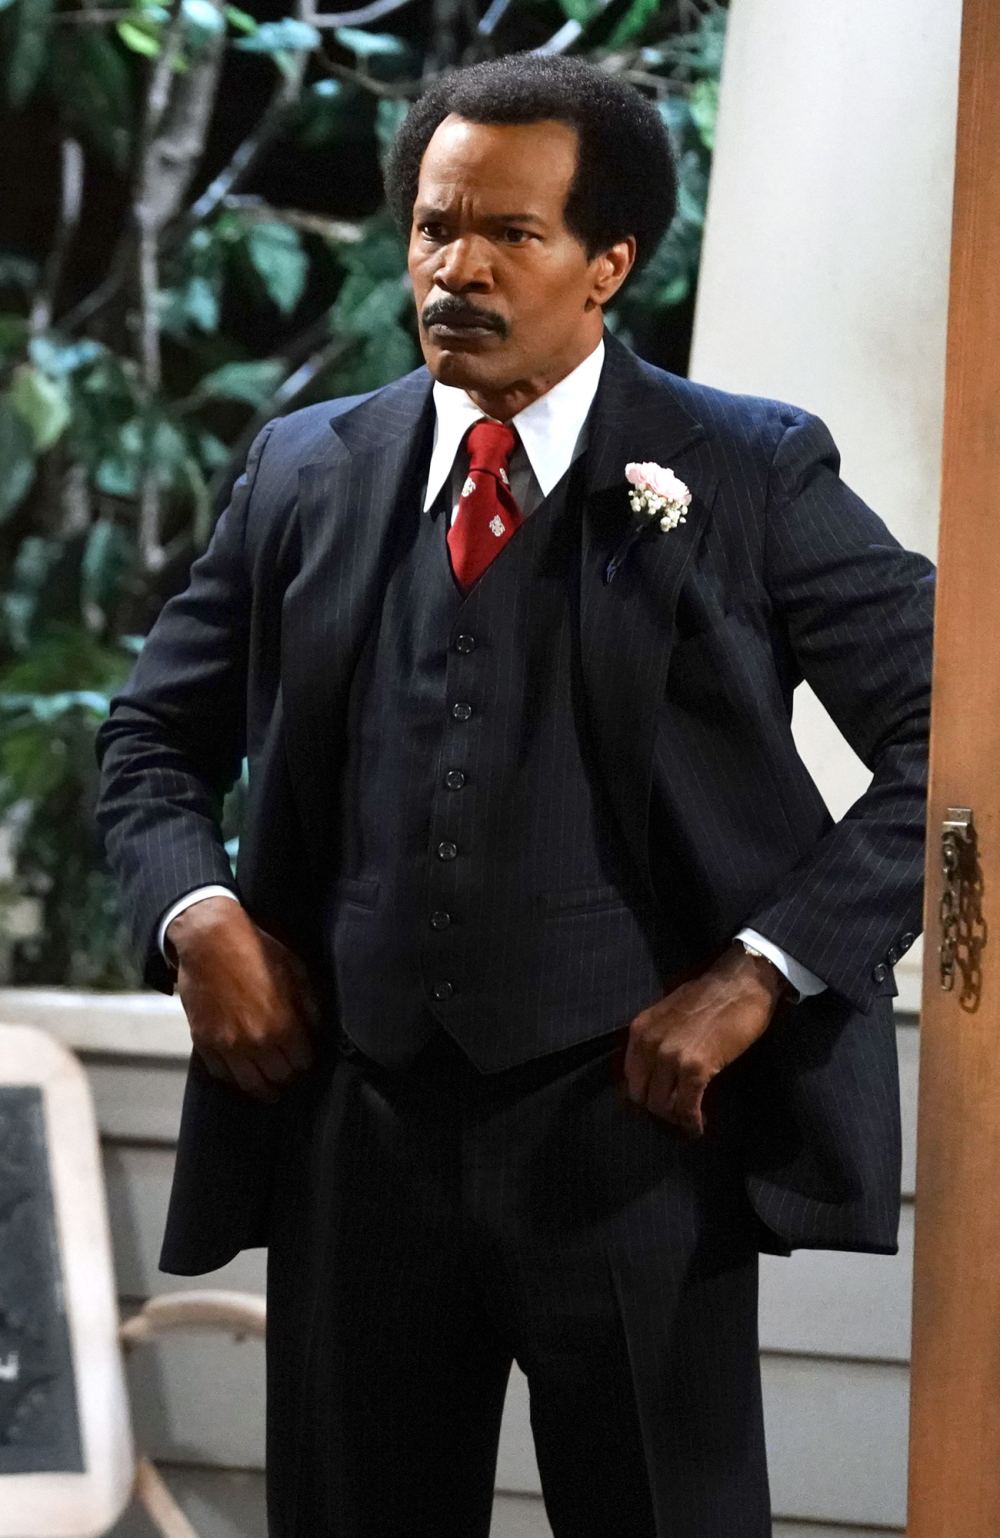 Jamie Foxx Flubs Line and Breaks Character as George Jefferson on ‘All in the Family’ Live Special